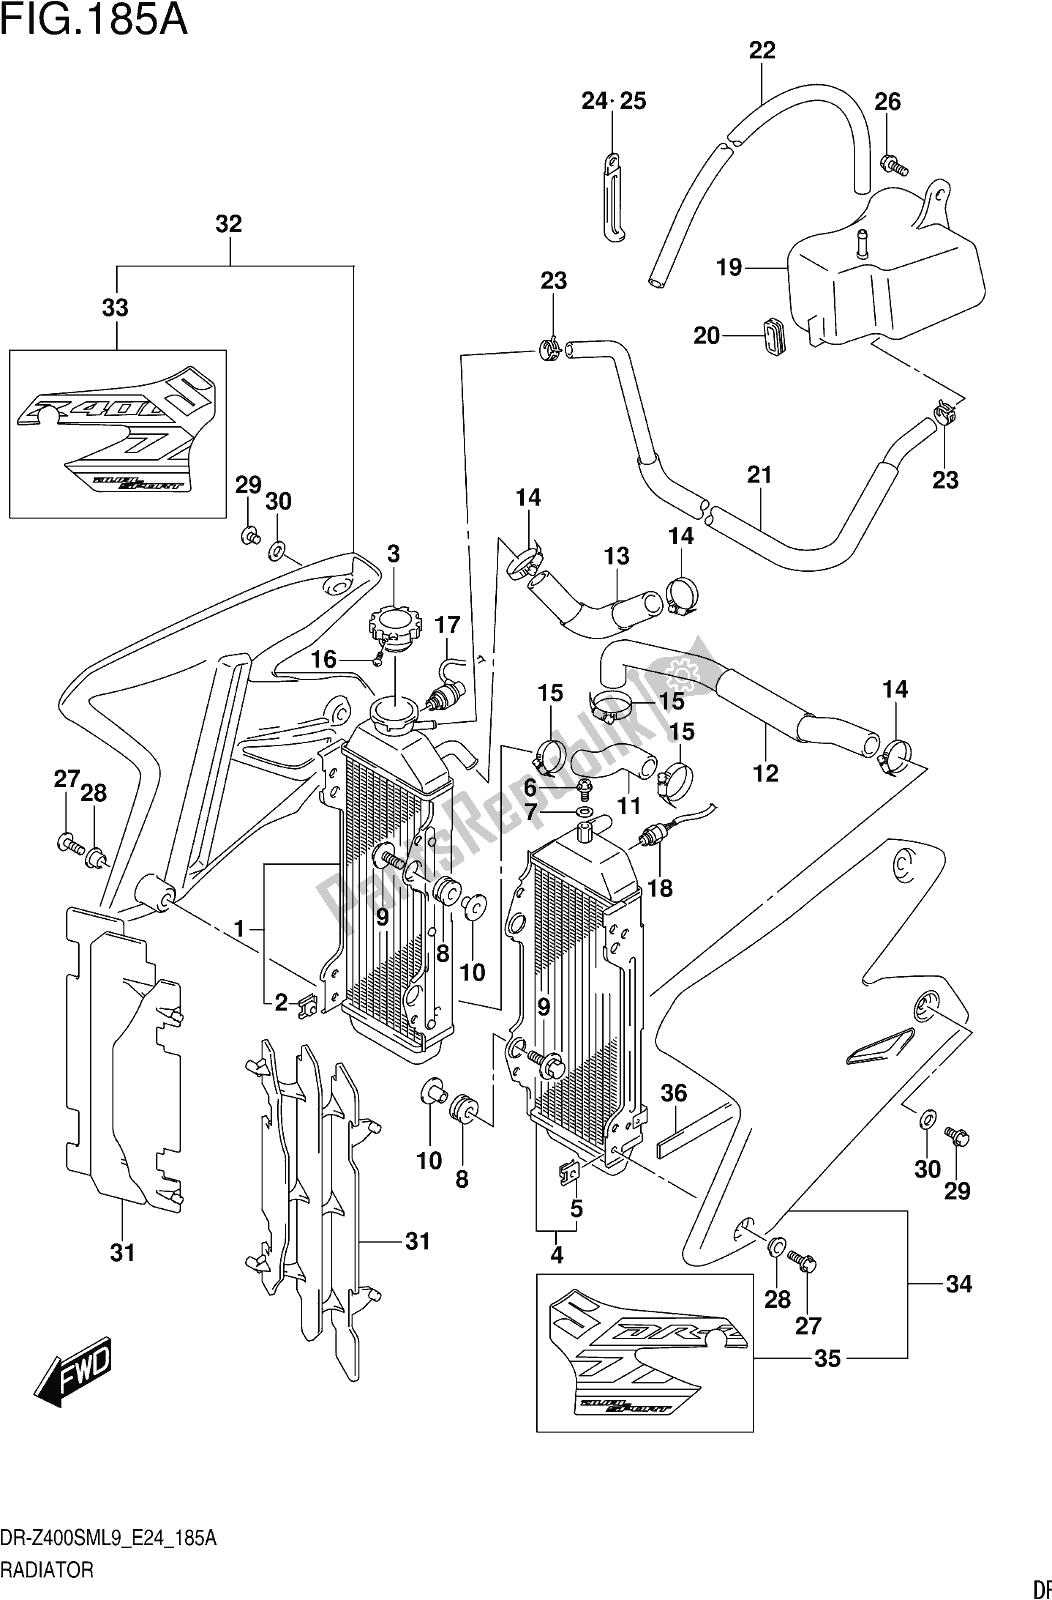 All parts for the Fig. 185a Radiator of the Suzuki DR-Z 400 SM 2019